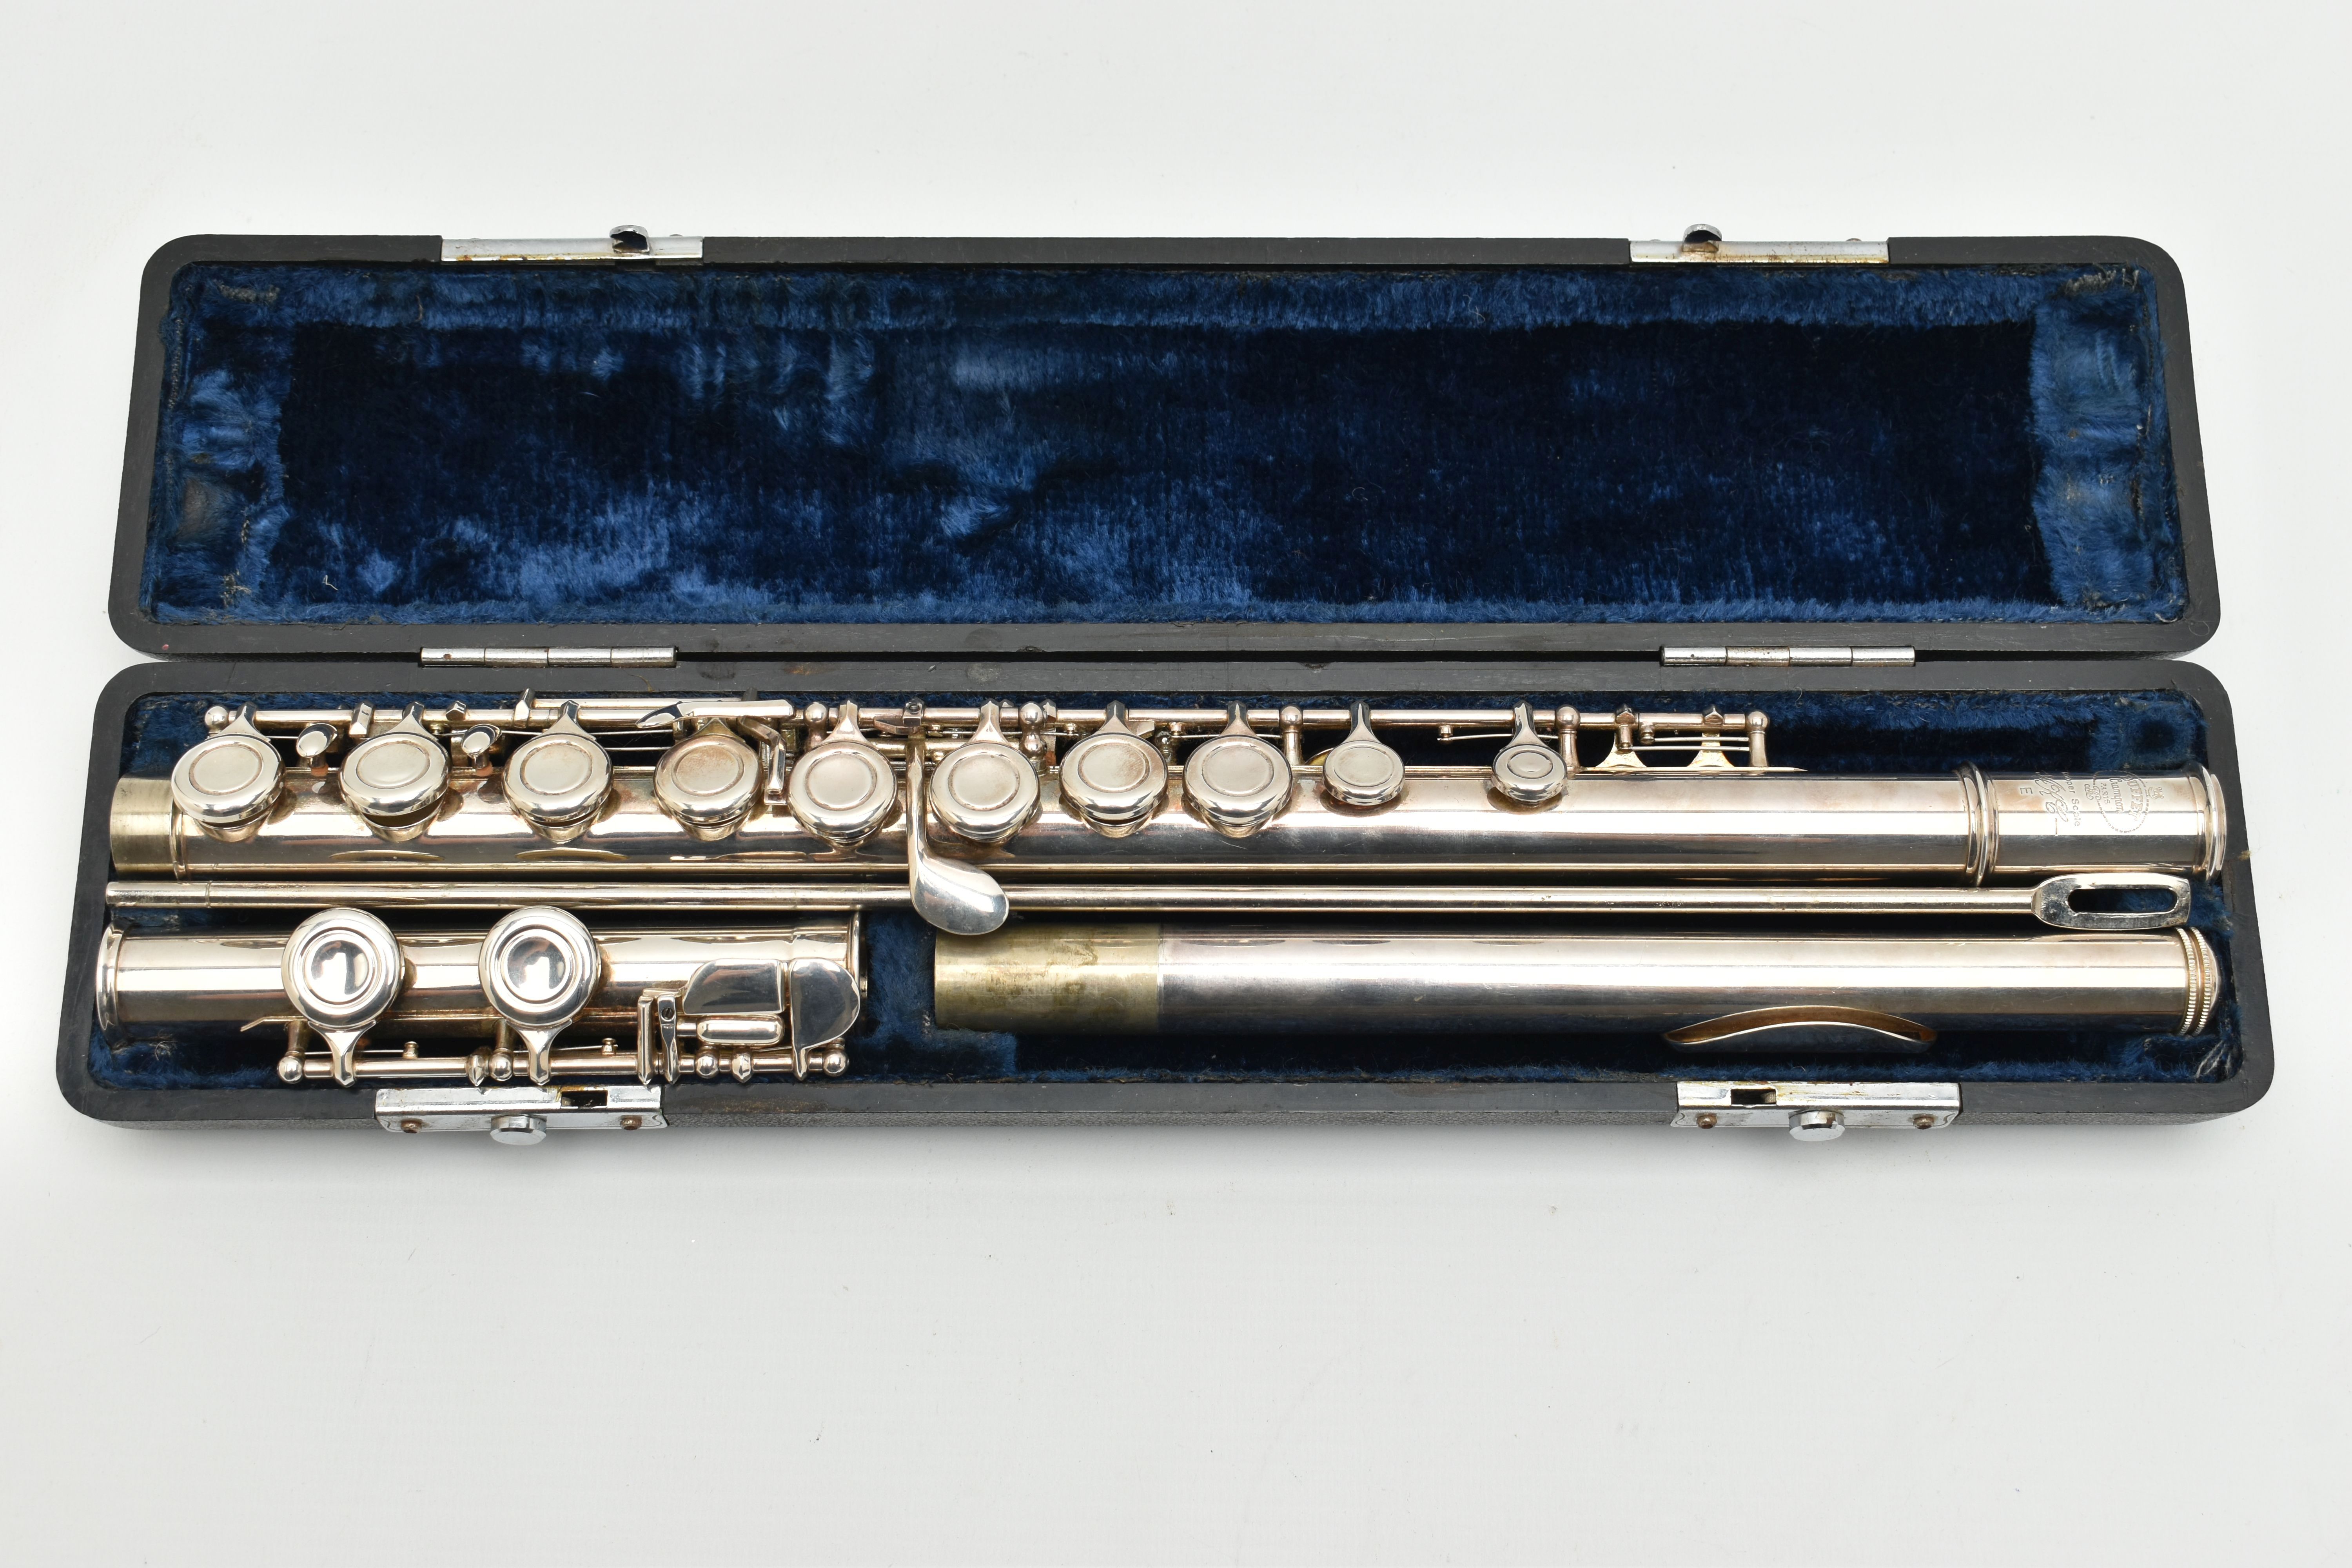 A FRENCH SILVER PLATED FLUTE, BUFFET CAMPON COOPER 228, in good working order